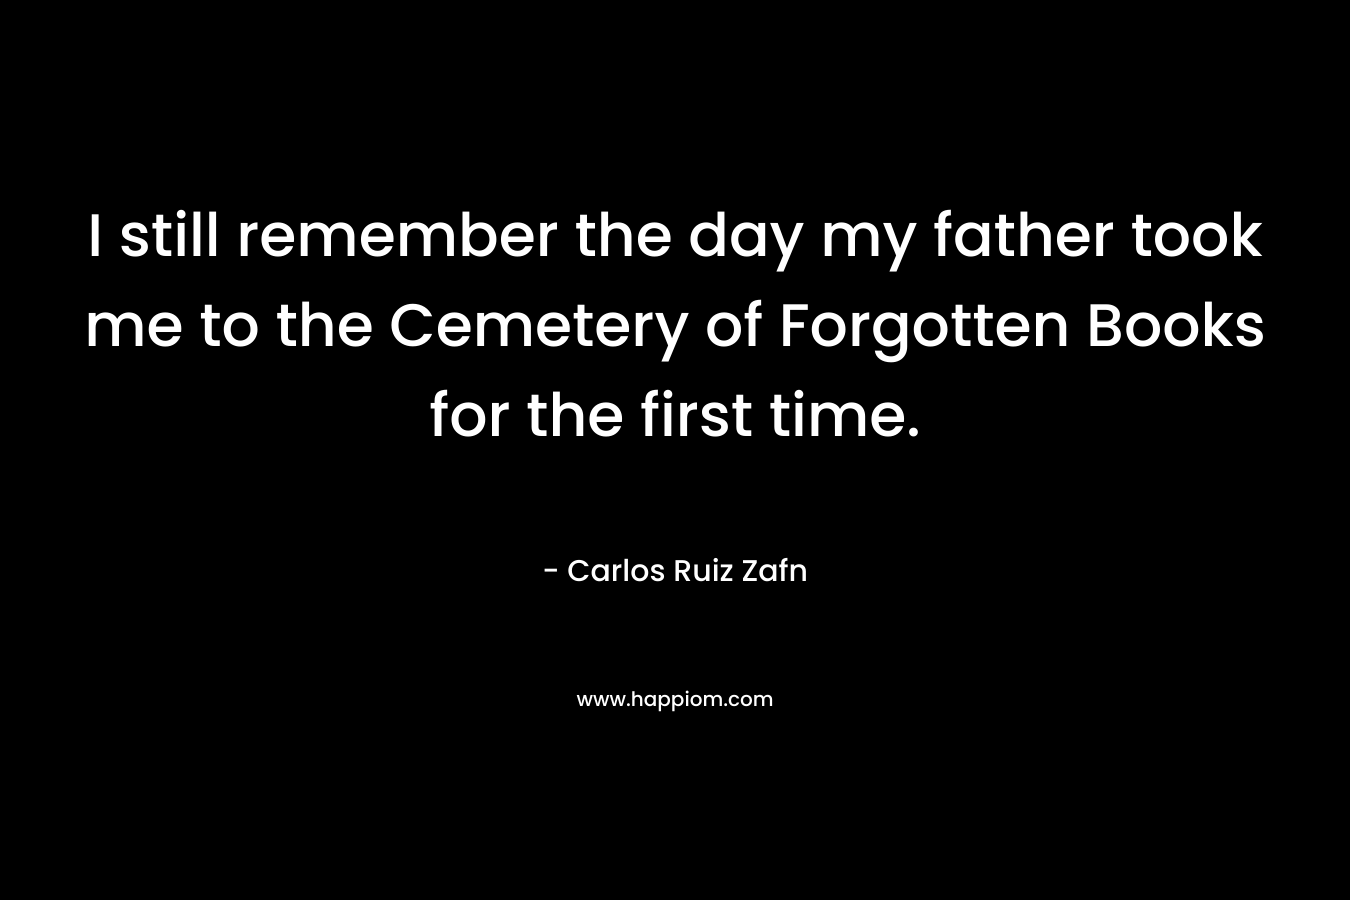 I still remember the day my father took me to the Cemetery of Forgotten Books for the first time.